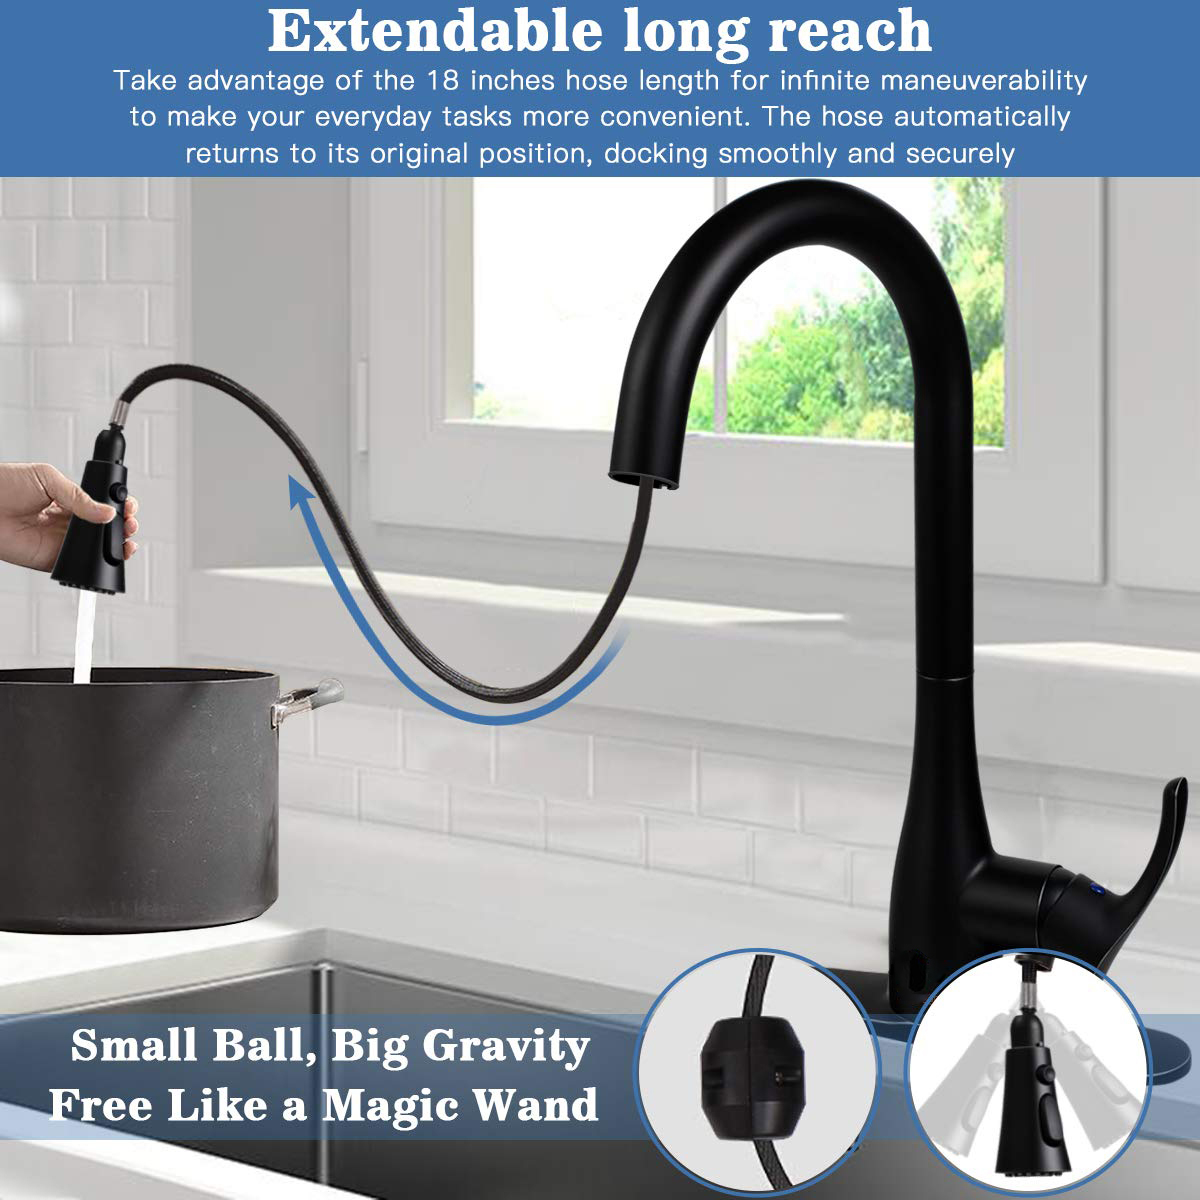 Aquacubic cUPC Brass Automatic Smart Swan Goose Neck Touchless Sensor Infrared Pull Down Kitchen Faucet